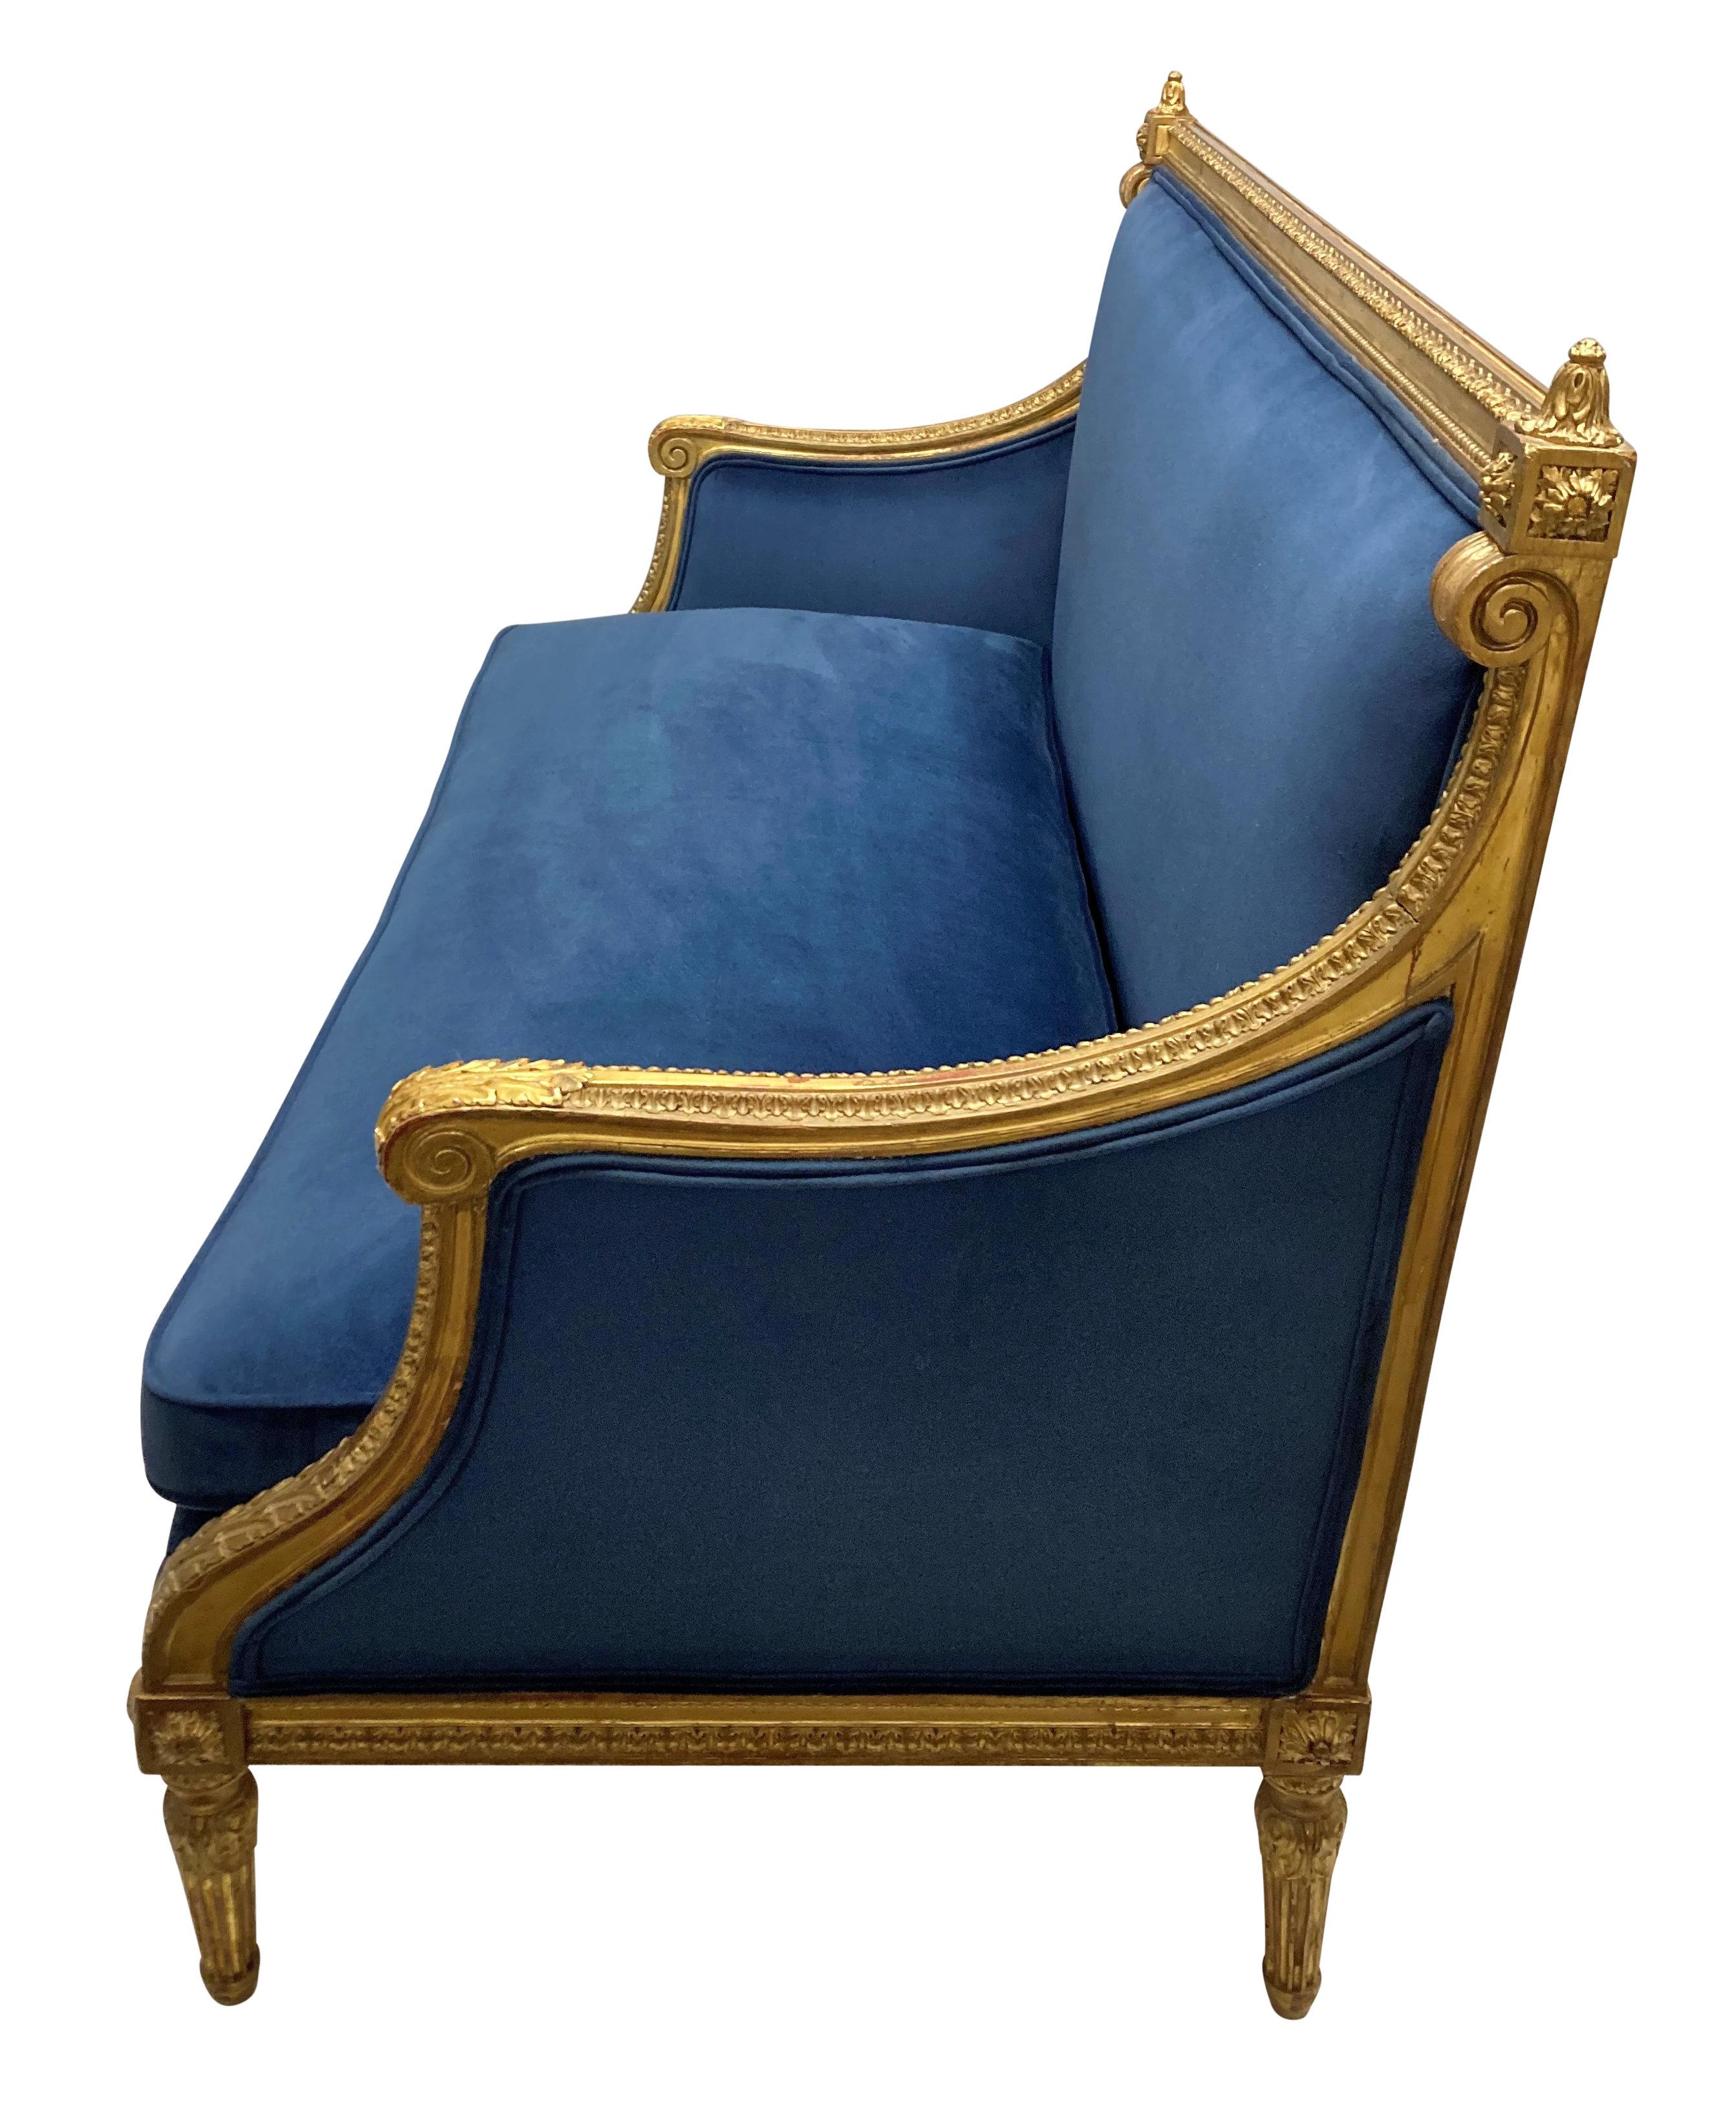 French Louis XVI Style Giltwood Settee In Blue Velvet For Sale 2